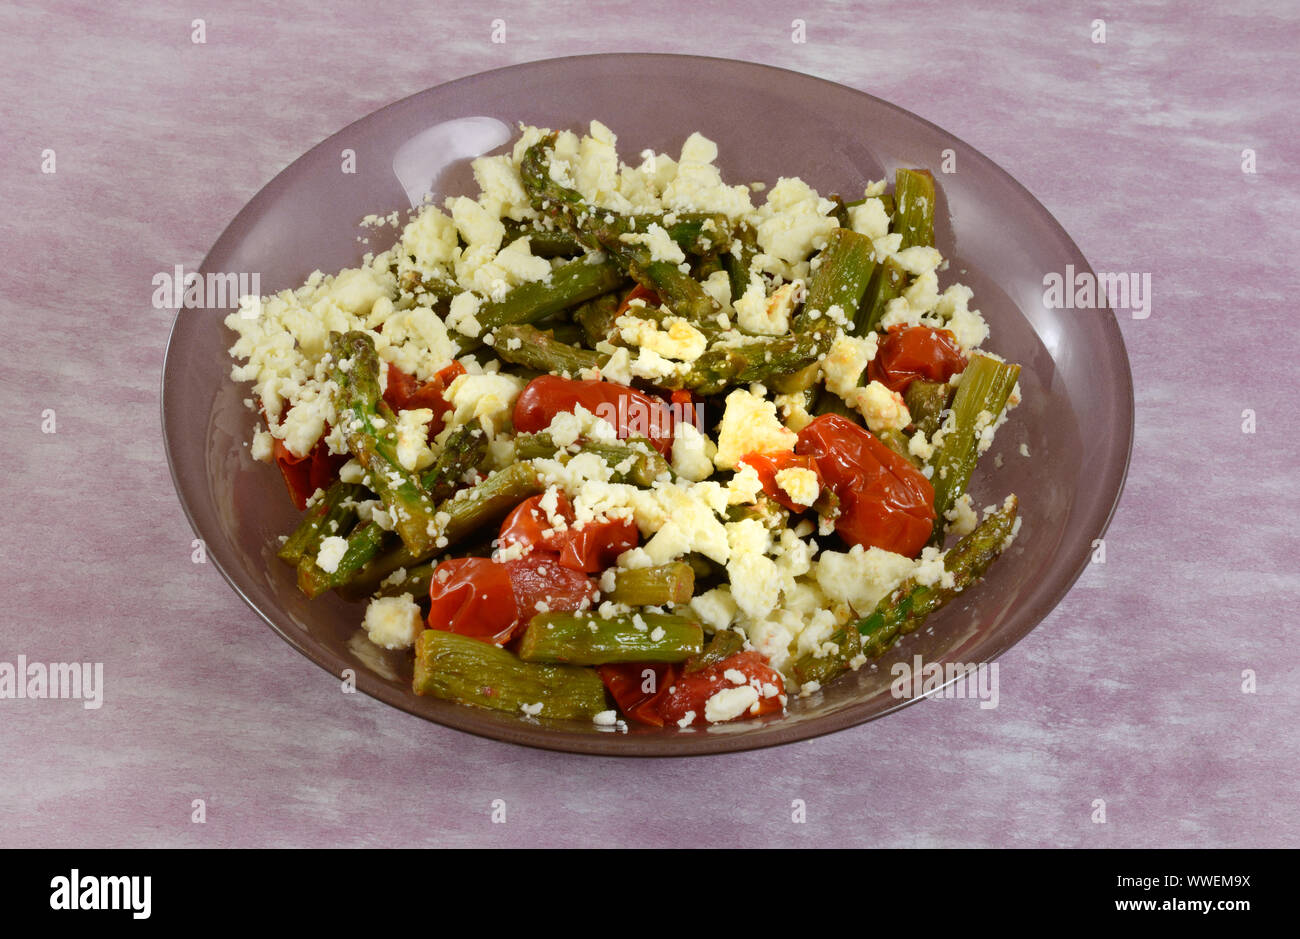 Asparagus and tomato side dish with crumbled feta cheese topping Stock Photo